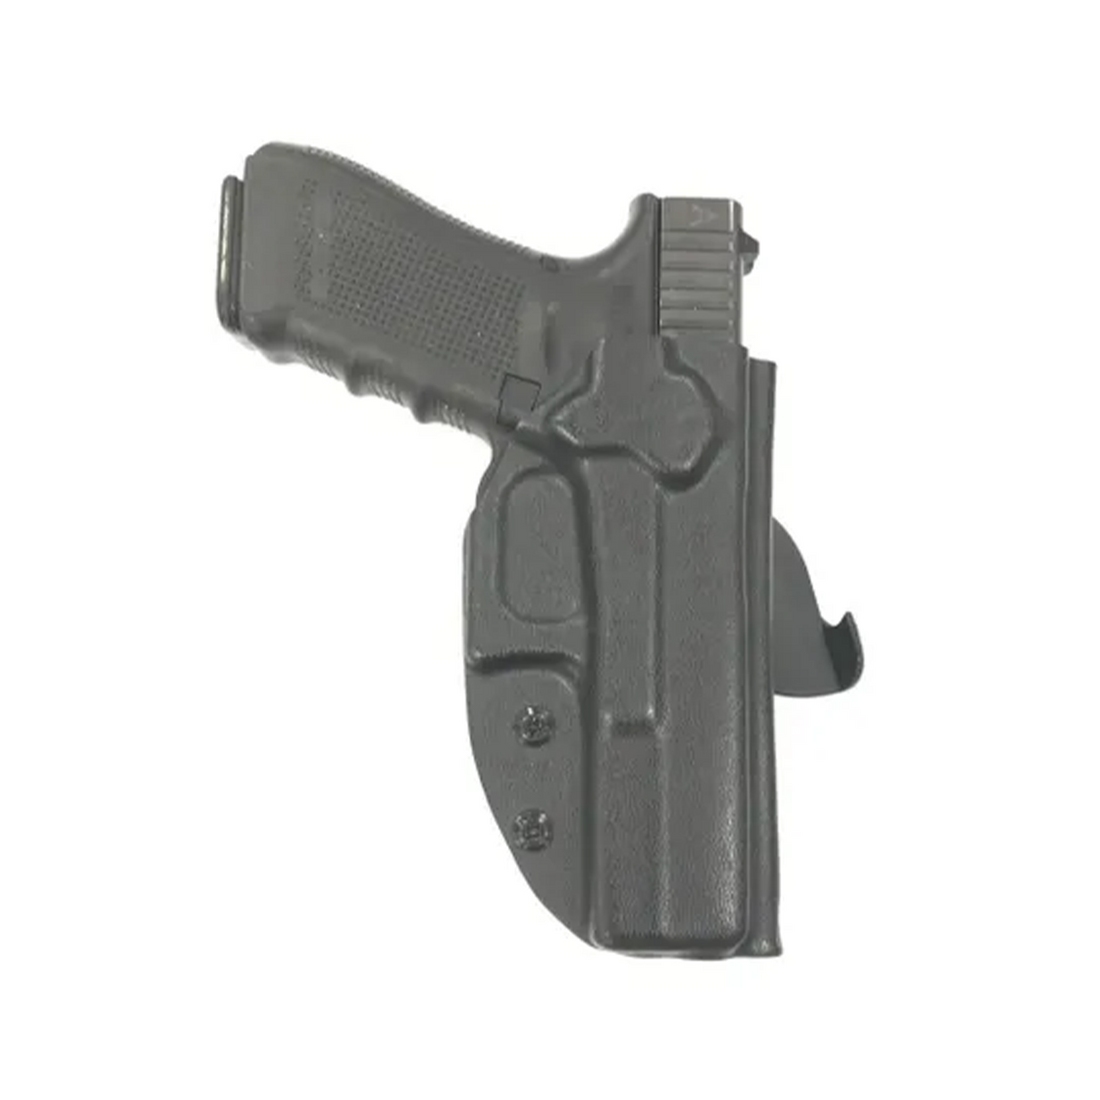 Colt OWB Paddle Holsters